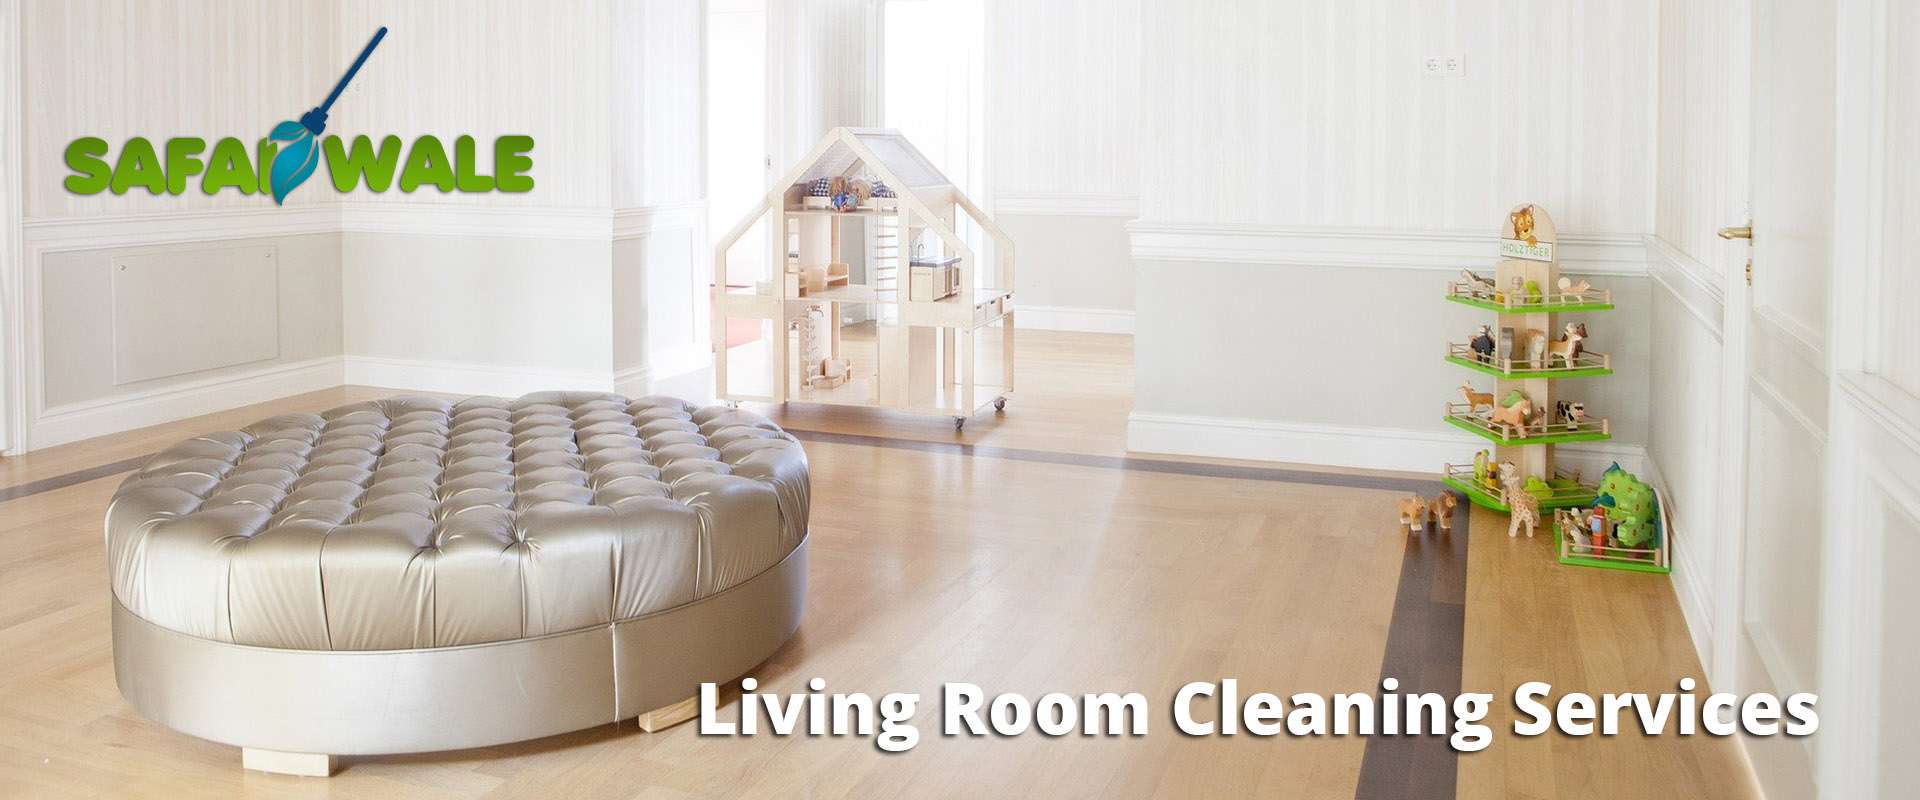 living room cleaning services near me